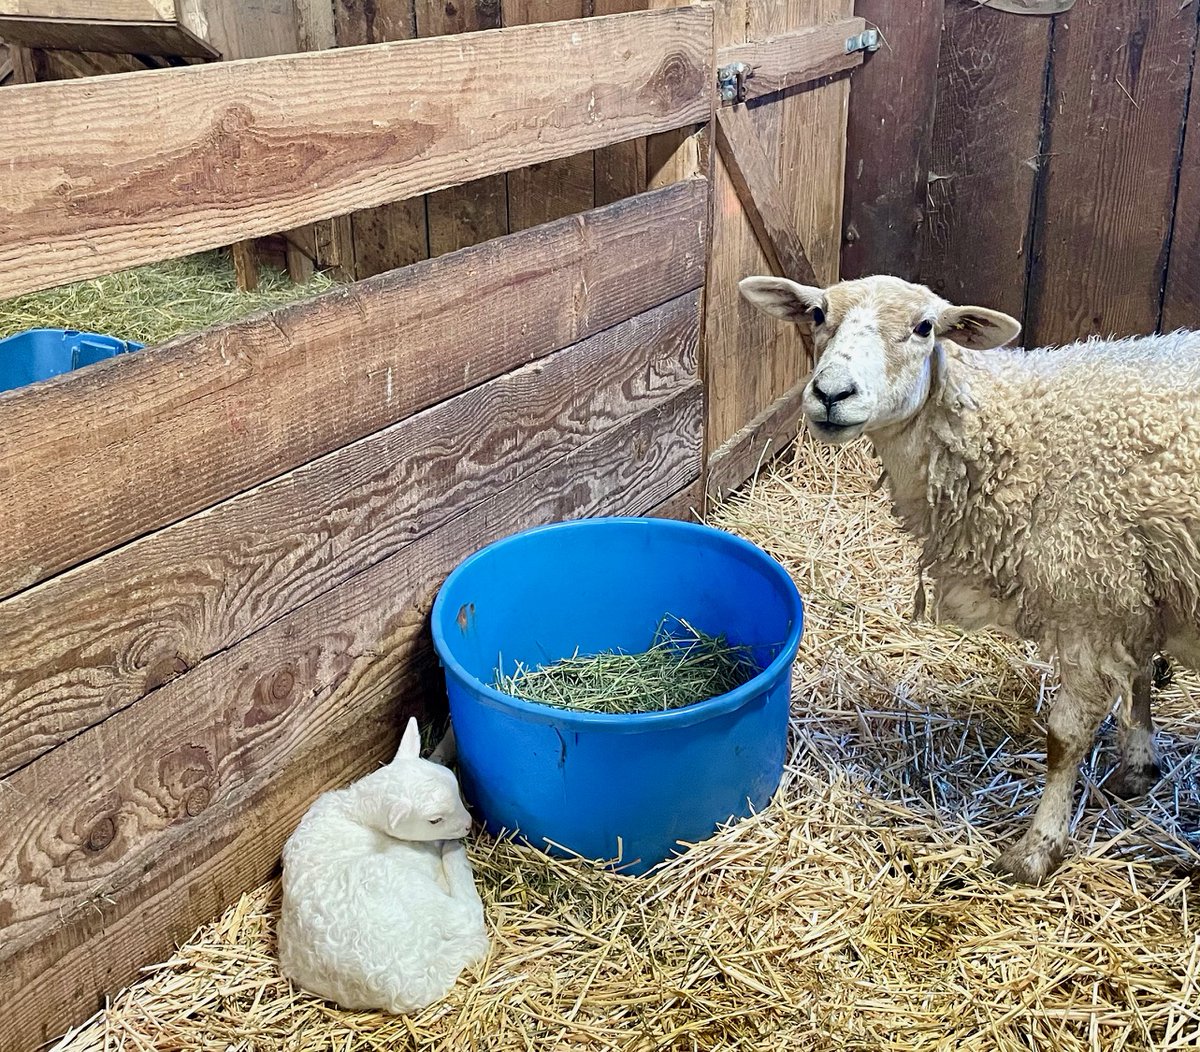 This week I spent a few days at Leaping Lamb Farm in Alsea, Oregon. I had a wonderful time staying in the cottage, and the night before leaving, a new lamb was born. #leapinglambfarm @traveloregon #familyfarm #farmadventures #wanderlust #outdoorfun